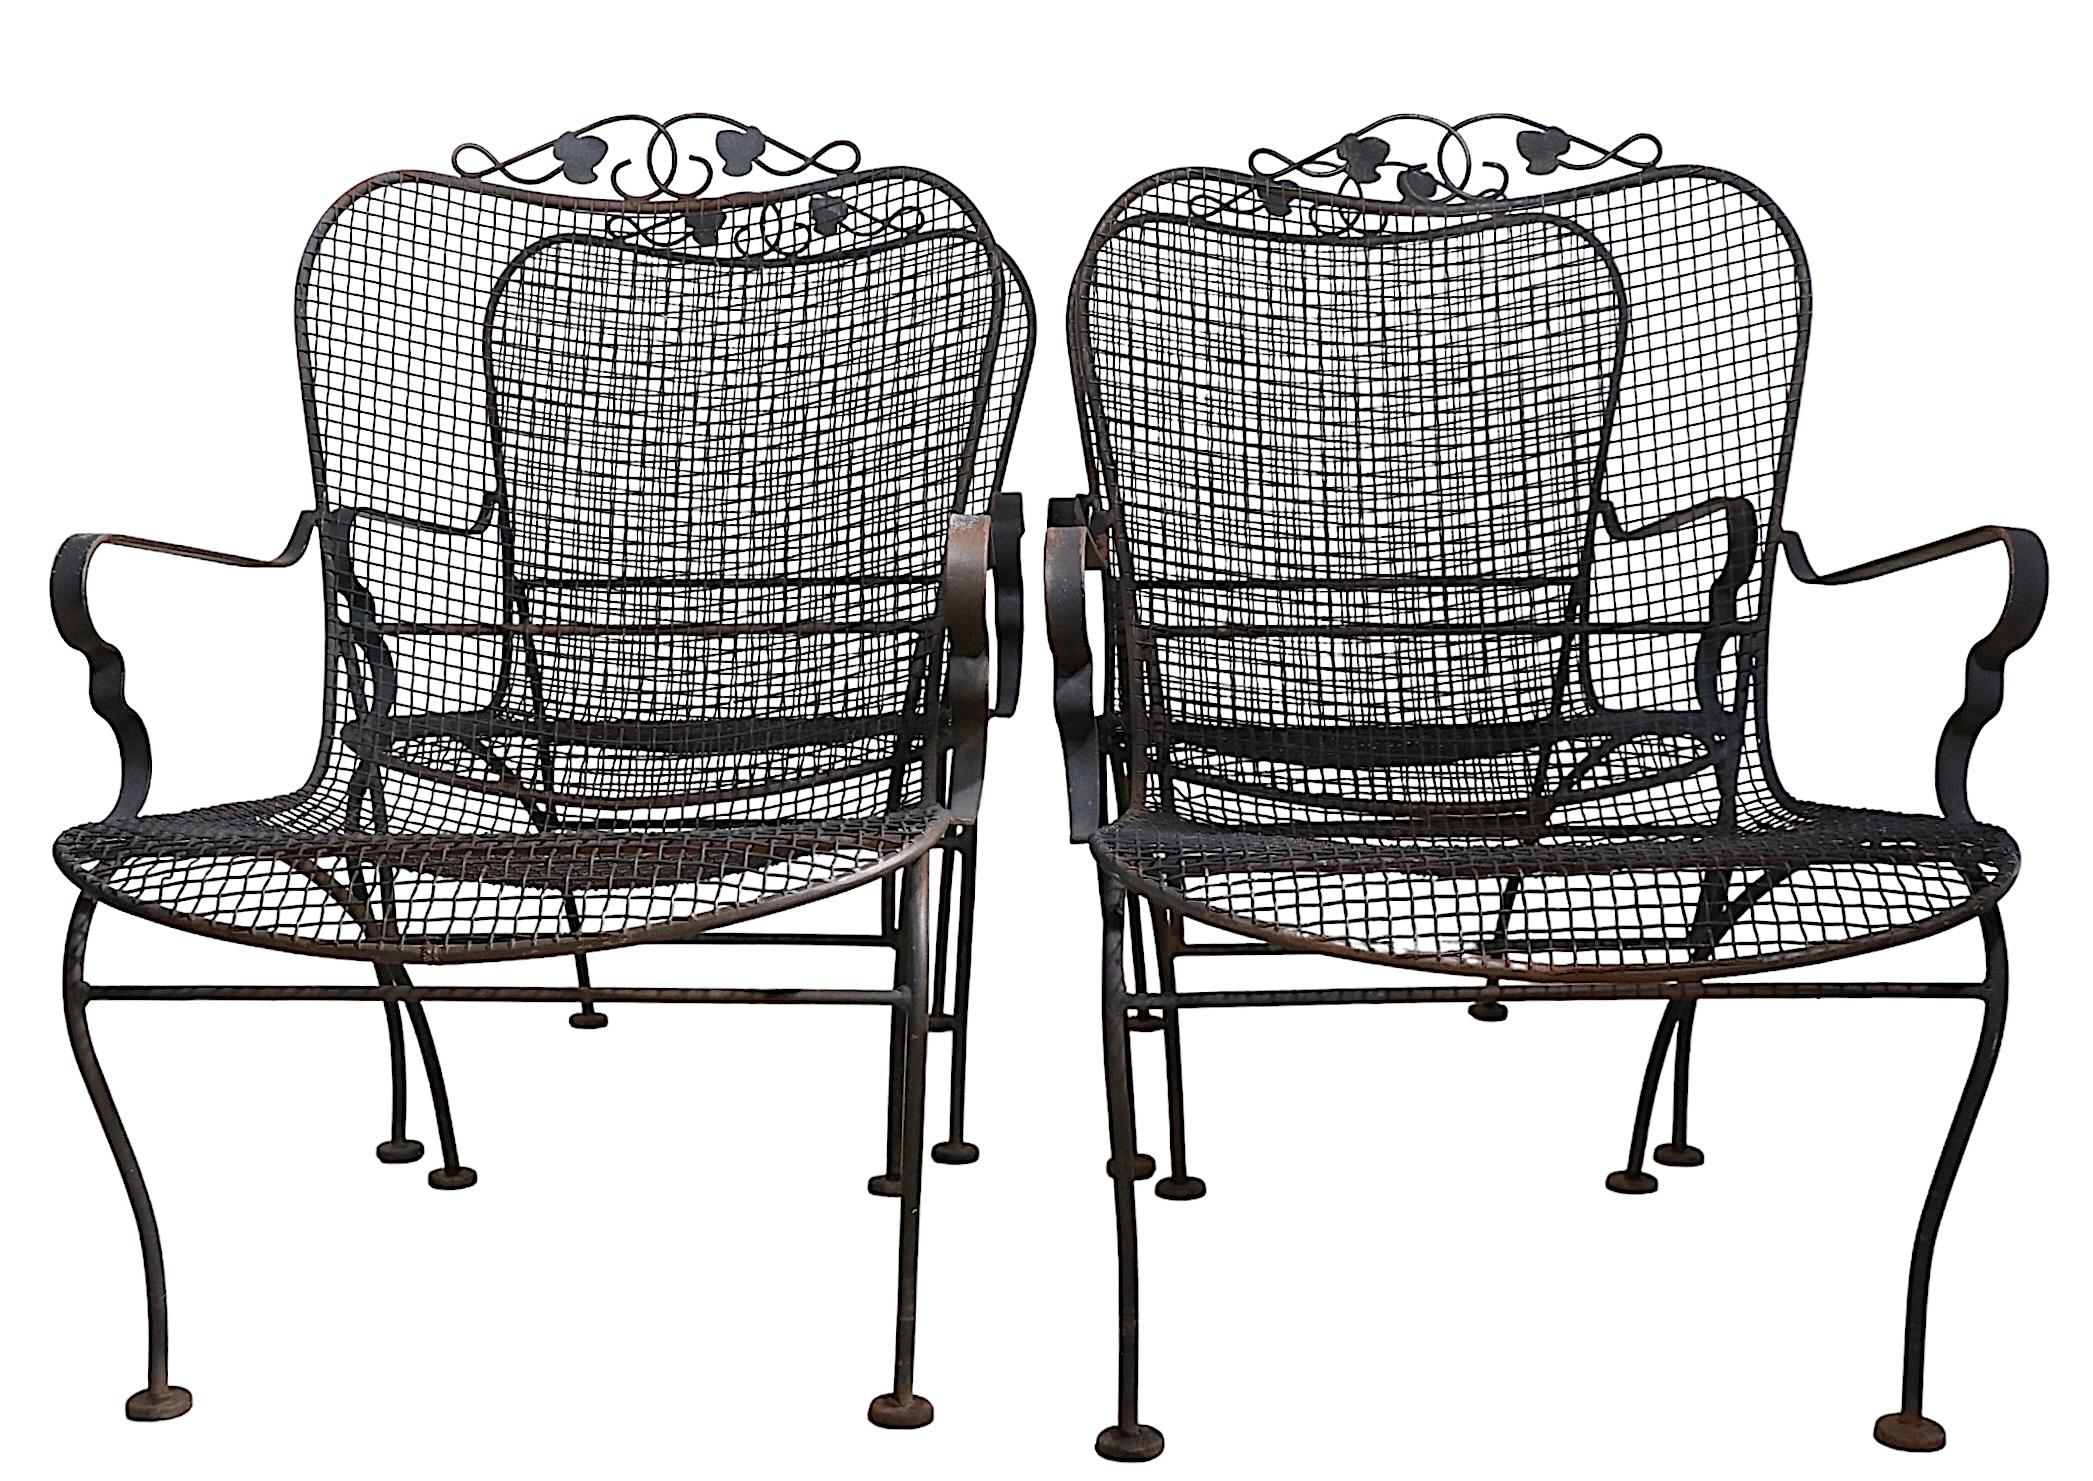 Wrought Iron Set of Four Garden, Patio, Poolside Chairs by Woodard For Sale